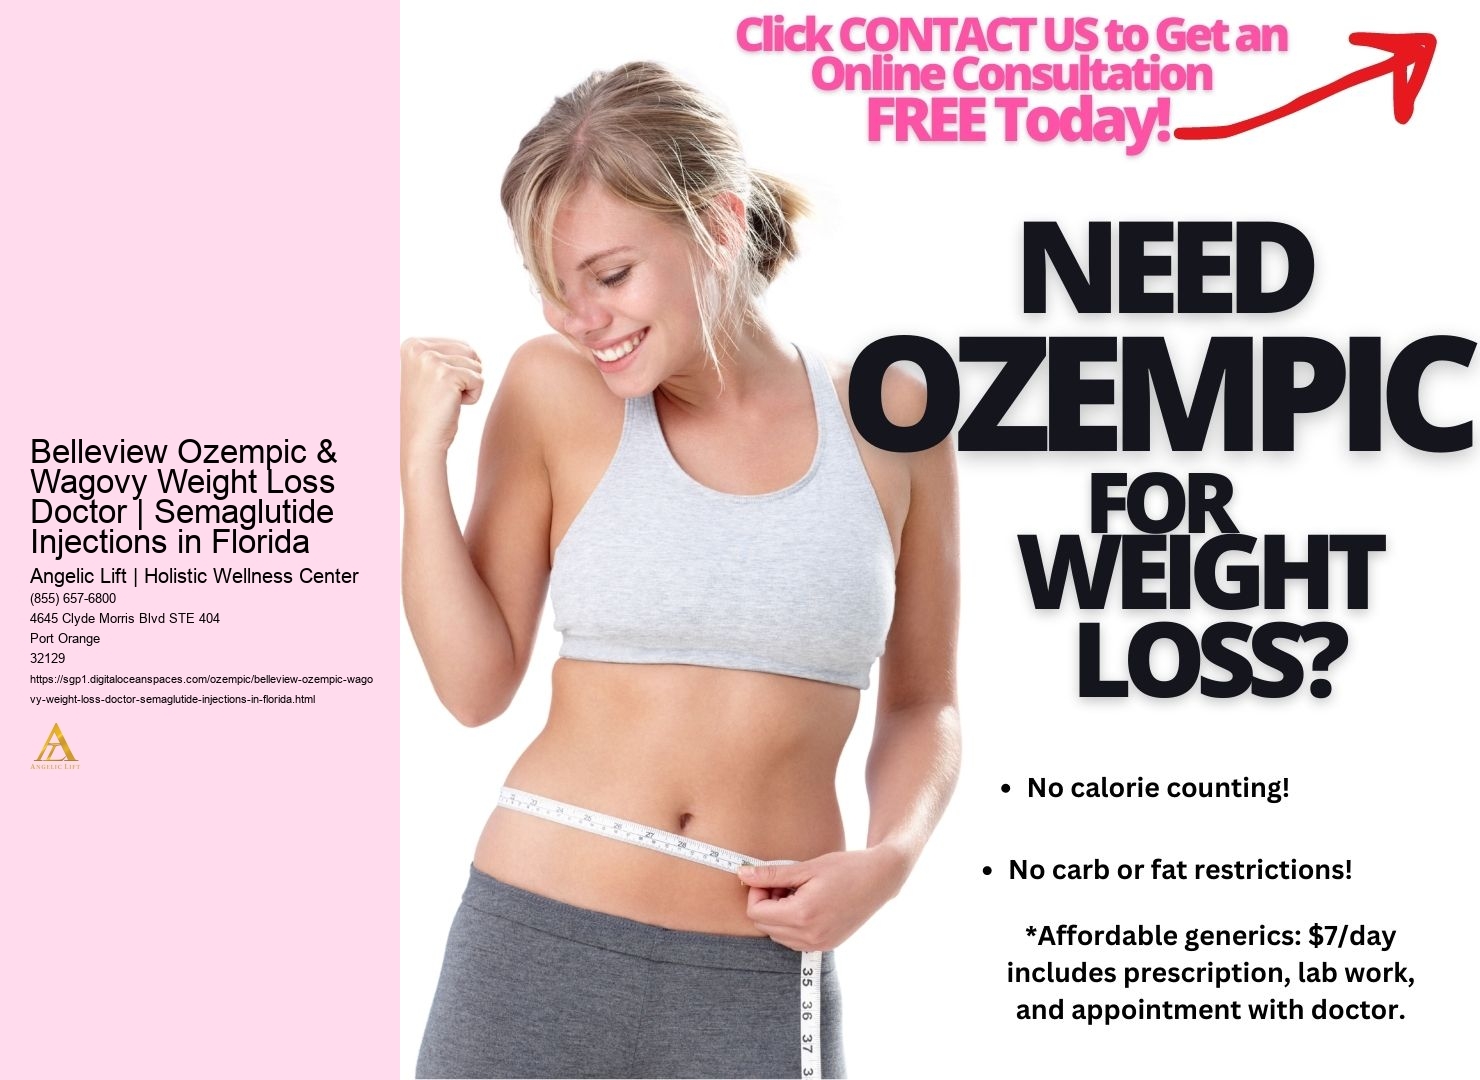 Belleview Ozempic & Wagovy Weight Loss Doctor | Semaglutide Injections in Florida